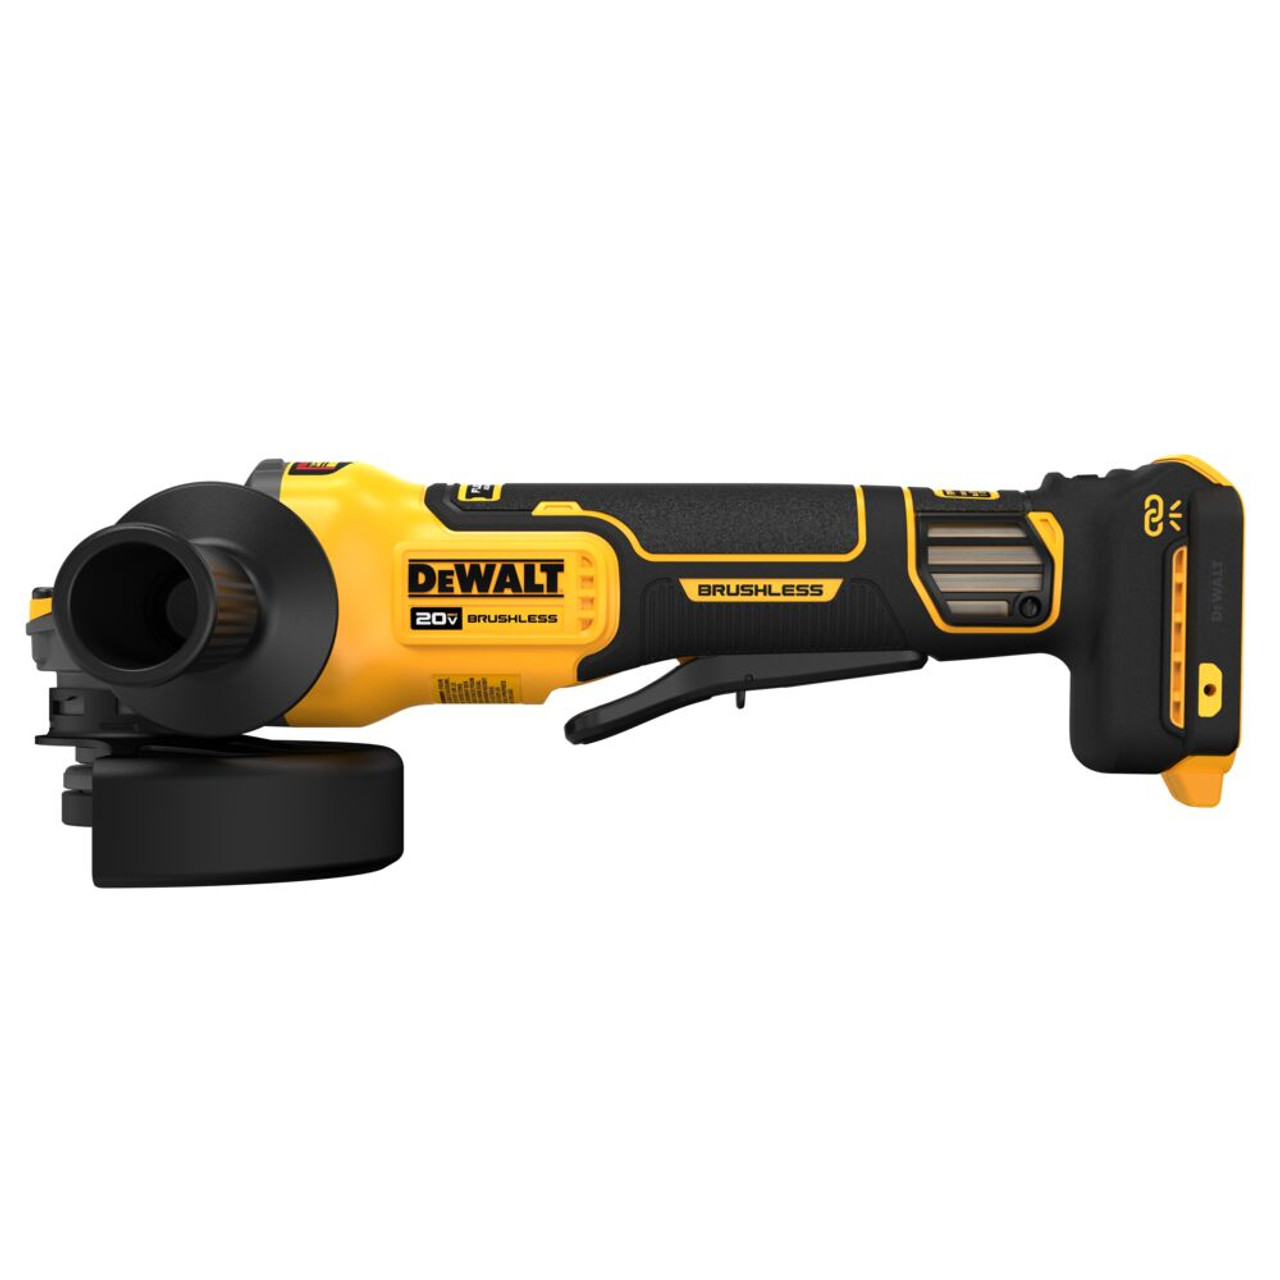 Dewalt DCG416VSB 20V MAX FVA 4-1/2 in in Small Angle Grinder Tool Only  TEGS Tools  Machinery